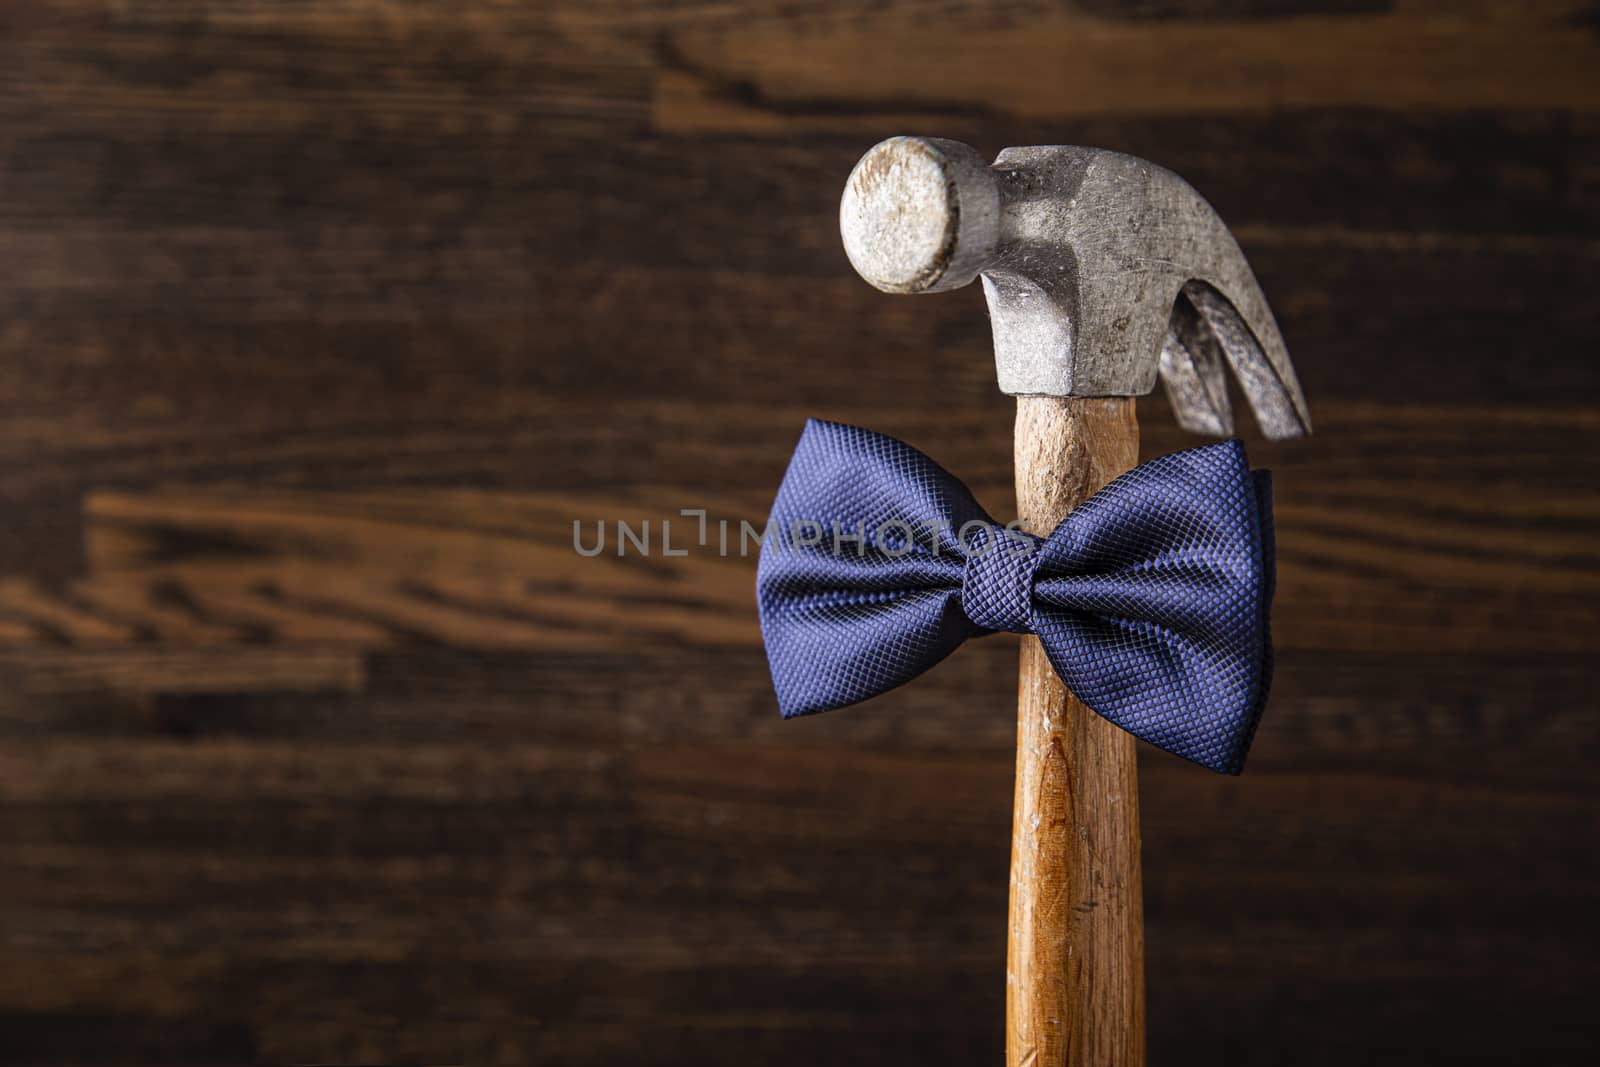 Old banged up hammer with a blue bowtie against a wood background